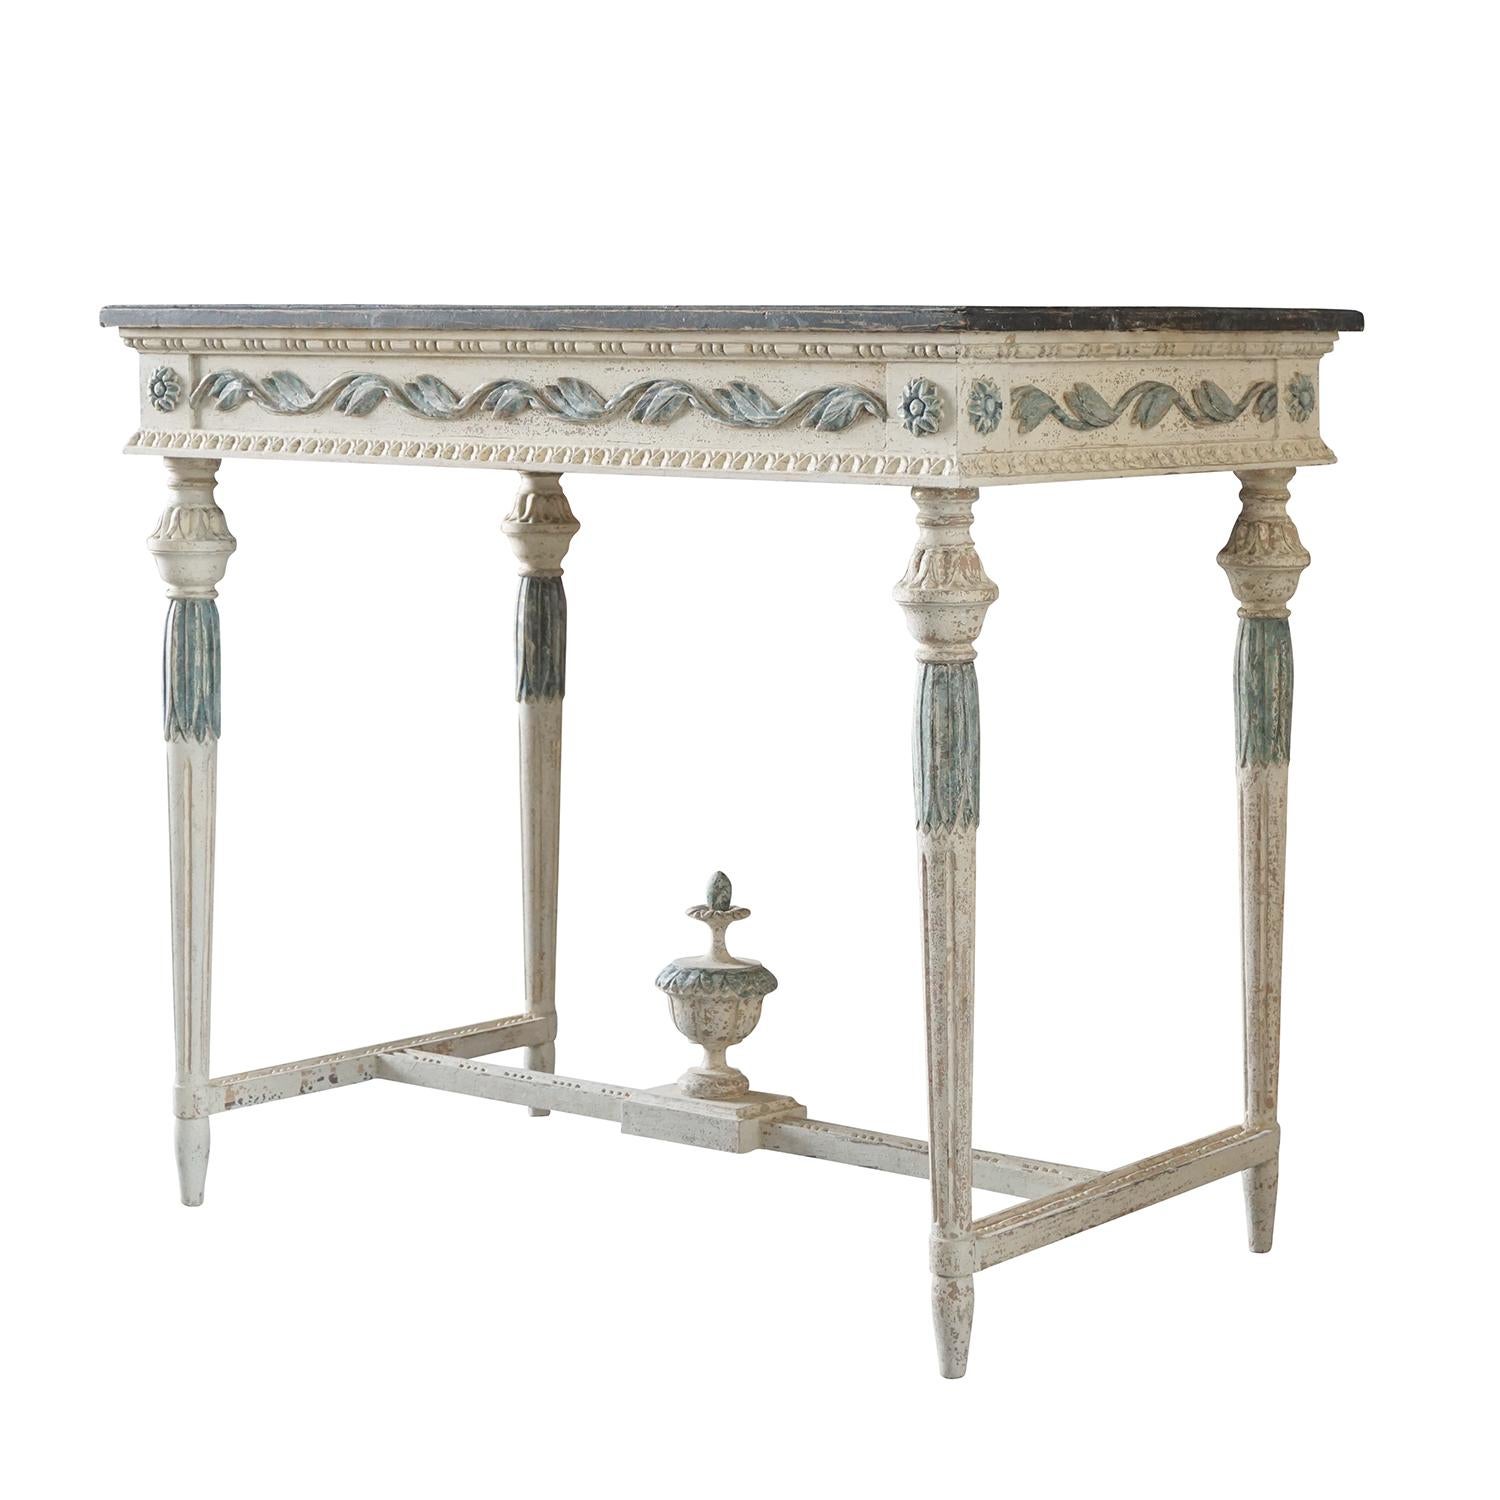 An antique Swedish Gustavian freestanding console table made of pinewood, scraped down to his original hardware and original grey, dark blue color faux marble hand painted. The Scandinavian hand carved console table is in good condition, detailed in